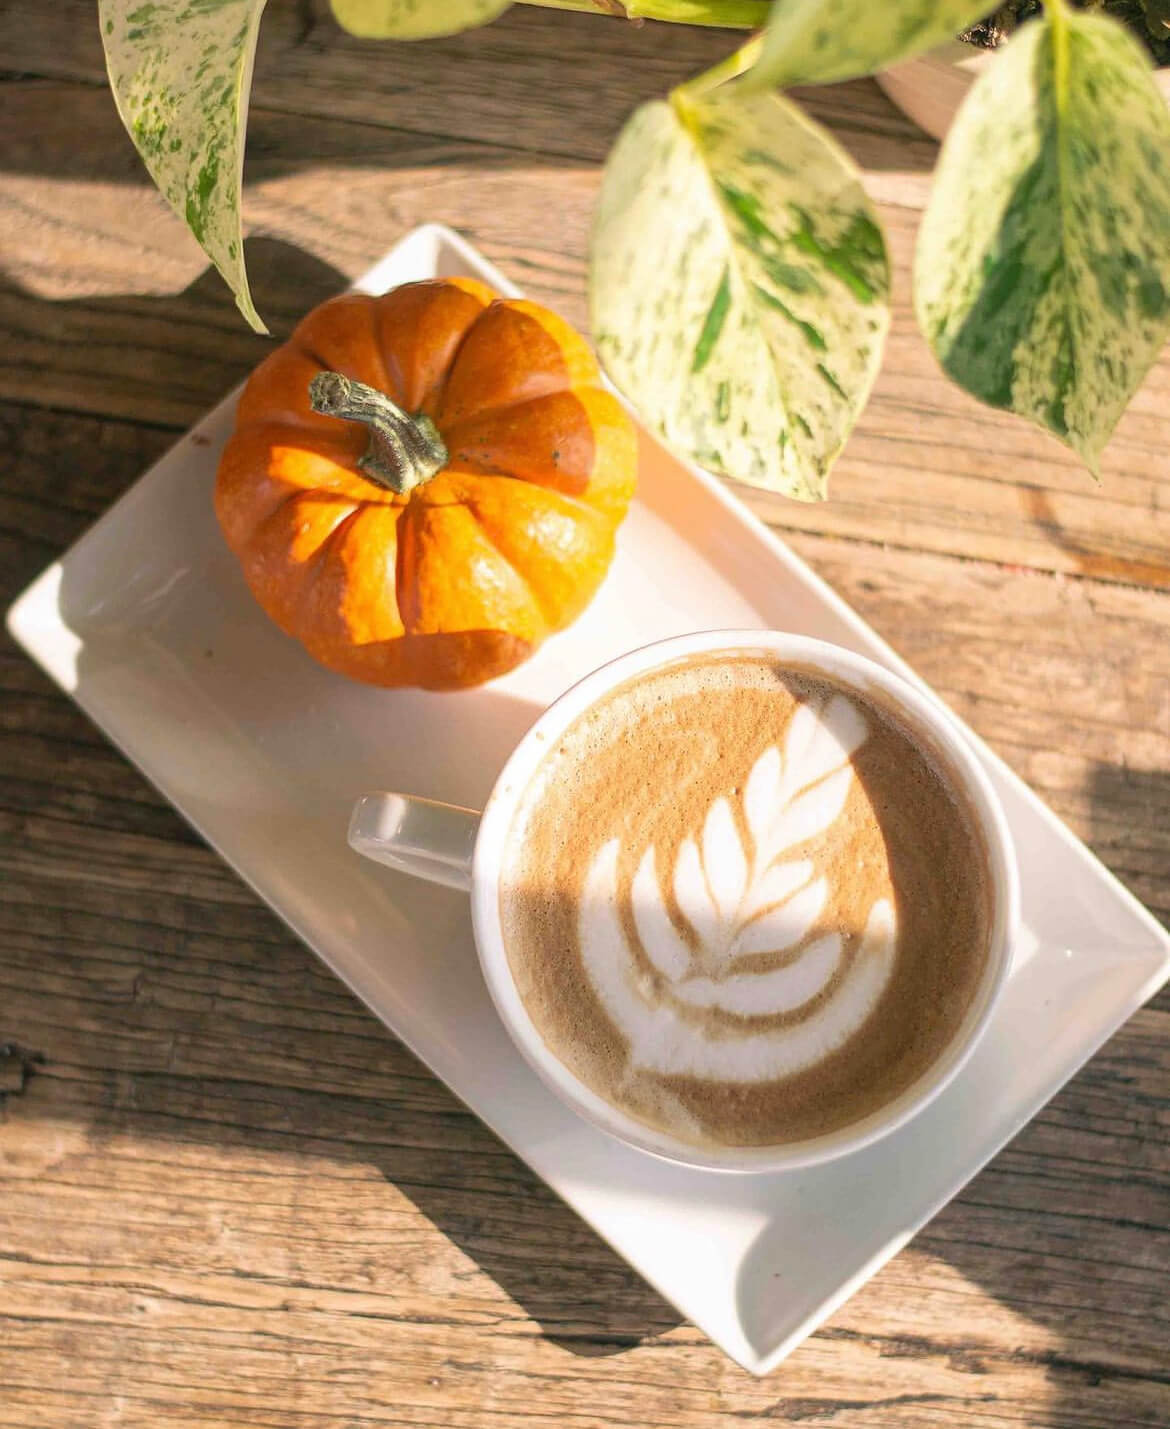 Coffee and pumpkin on table